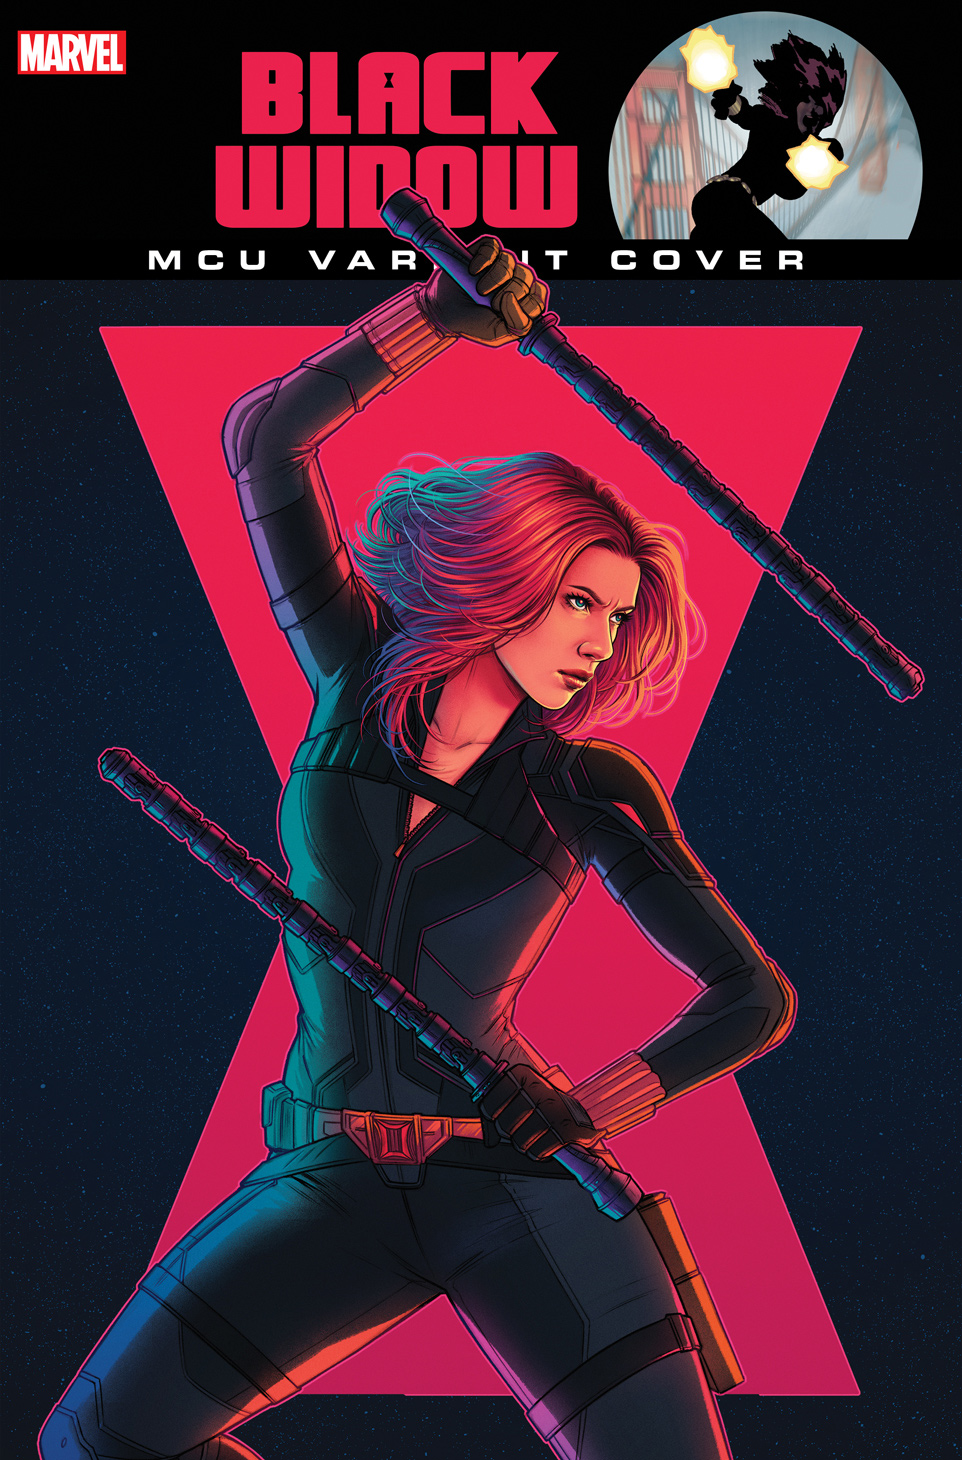 Marvel Comics Showcases Black Widow On New Marvel Cinematic Universe Inspired Covers Previews